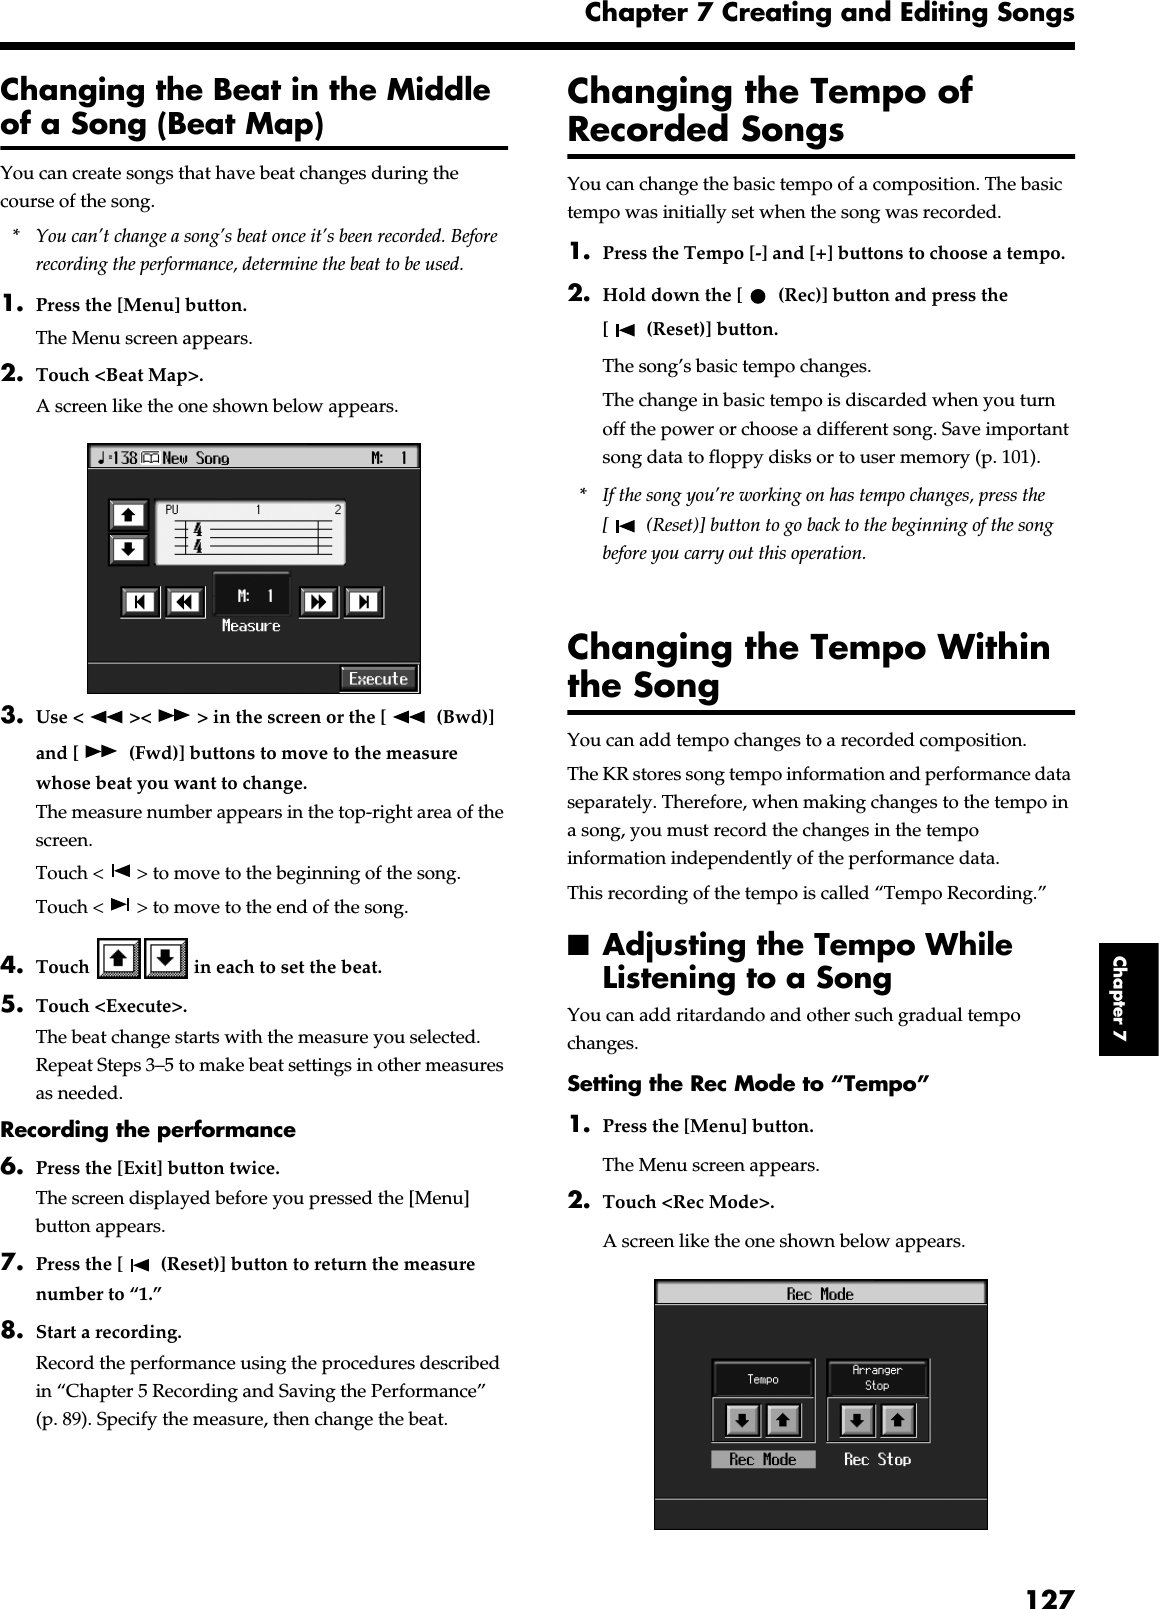 127Chapter 7 Creating and Editing SongsChapter 7Changing the Beat in the Middle of a Song (Beat Map)You can create songs that have beat changes during the course of the song.* You can’t change a song’s beat once it’s been recorded. Before recording the performance, determine the beat to be used.1. Press the [Menu] button.The Menu screen appears.2. Touch &lt;Beat Map&gt;.A screen like the one shown below appears.fig.d-beatmap.eps_503. Use &lt; &gt;&lt; &gt; in the screen or the [  (Bwd)] and [  (Fwd)] buttons to move to the measure whose beat you want to change.The measure number appears in the top-right area of the screen.Touch &lt; &gt; to move to the beginning of the song.Touch &lt; &gt; to move to the end of the song.4. Touch   in each to set the beat.5. Touch &lt;Execute&gt;.The beat change starts with the measure you selected.Repeat Steps 3–5 to make beat settings in other measures as needed.Recording the performance6. Press the [Exit] button twice.The screen displayed before you pressed the [Menu] button appears.7. Press the [  (Reset)] button to return the measure number to “1.”8. Start a recording.Record the performance using the procedures described in “Chapter 5 Recording and Saving the Performance” (p. 89). Specify the measure, then change the beat.Changing the Tempo of Recorded SongsYou can change the basic tempo of a composition. The basic tempo was initially set when the song was recorded.1. Press the Tempo [-] and [+] buttons to choose a tempo.2. Hold down the [  (Rec)] button and press the [  (Reset)] button.The song’s basic tempo changes.The change in basic tempo is discarded when you turn off the power or choose a different song. Save important song data to floppy disks or to user memory (p. 101).* If the song you’re working on has tempo changes, press the [  (Reset)] button to go back to the beginning of the song before you carry out this operation.Changing the Tempo Within the SongYou can add tempo changes to a recorded composition.The KR stores song tempo information and performance data separately. Therefore, when making changes to the tempo in a song, you must record the changes in the tempo information independently of the performance data.This recording of the tempo is called “Tempo Recording.”■Adjusting the Tempo While Listening to a SongYou can add ritardando and other such gradual tempo changes.Setting the Rec Mode to “Tempo”1. Press the [Menu] button.The Menu screen appears.2. Touch &lt;Rec Mode&gt;.A screen like the one shown below appears.fig.d-rec-tempo.eps_50